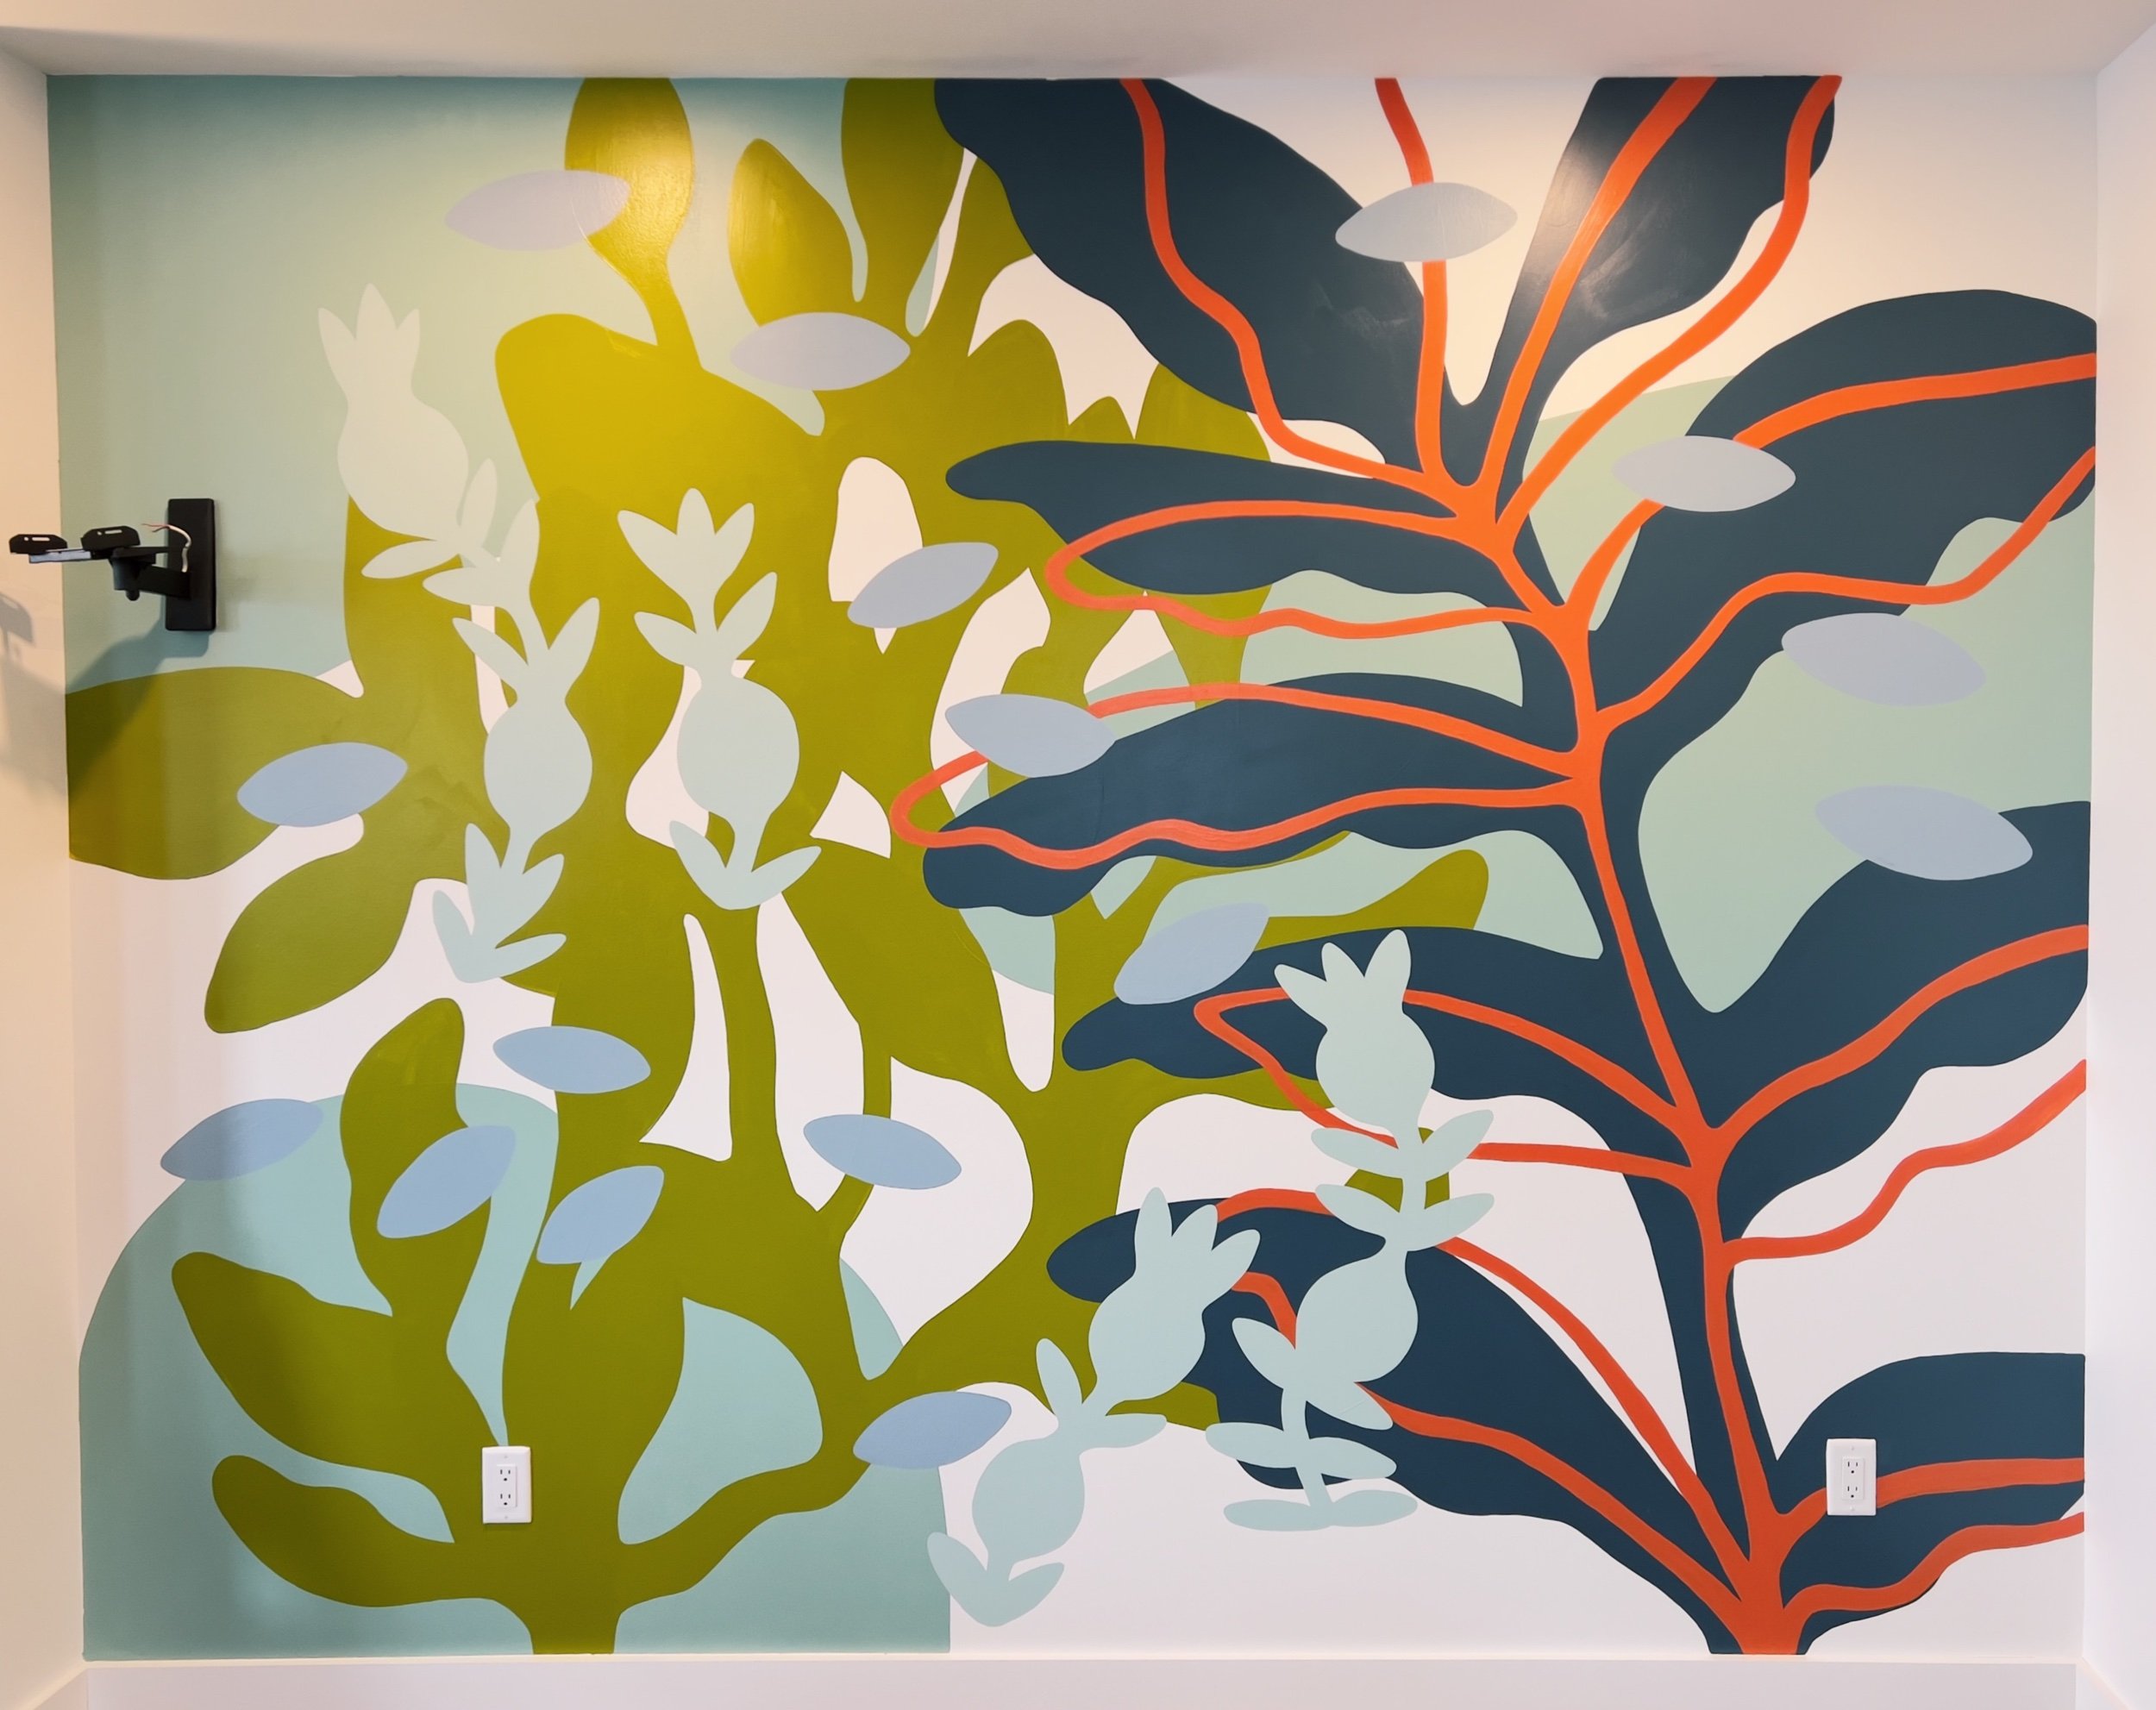  Commissioned mural for a private residential client in Portland, ME. This piece was designed and painted by hand in February 2023. 